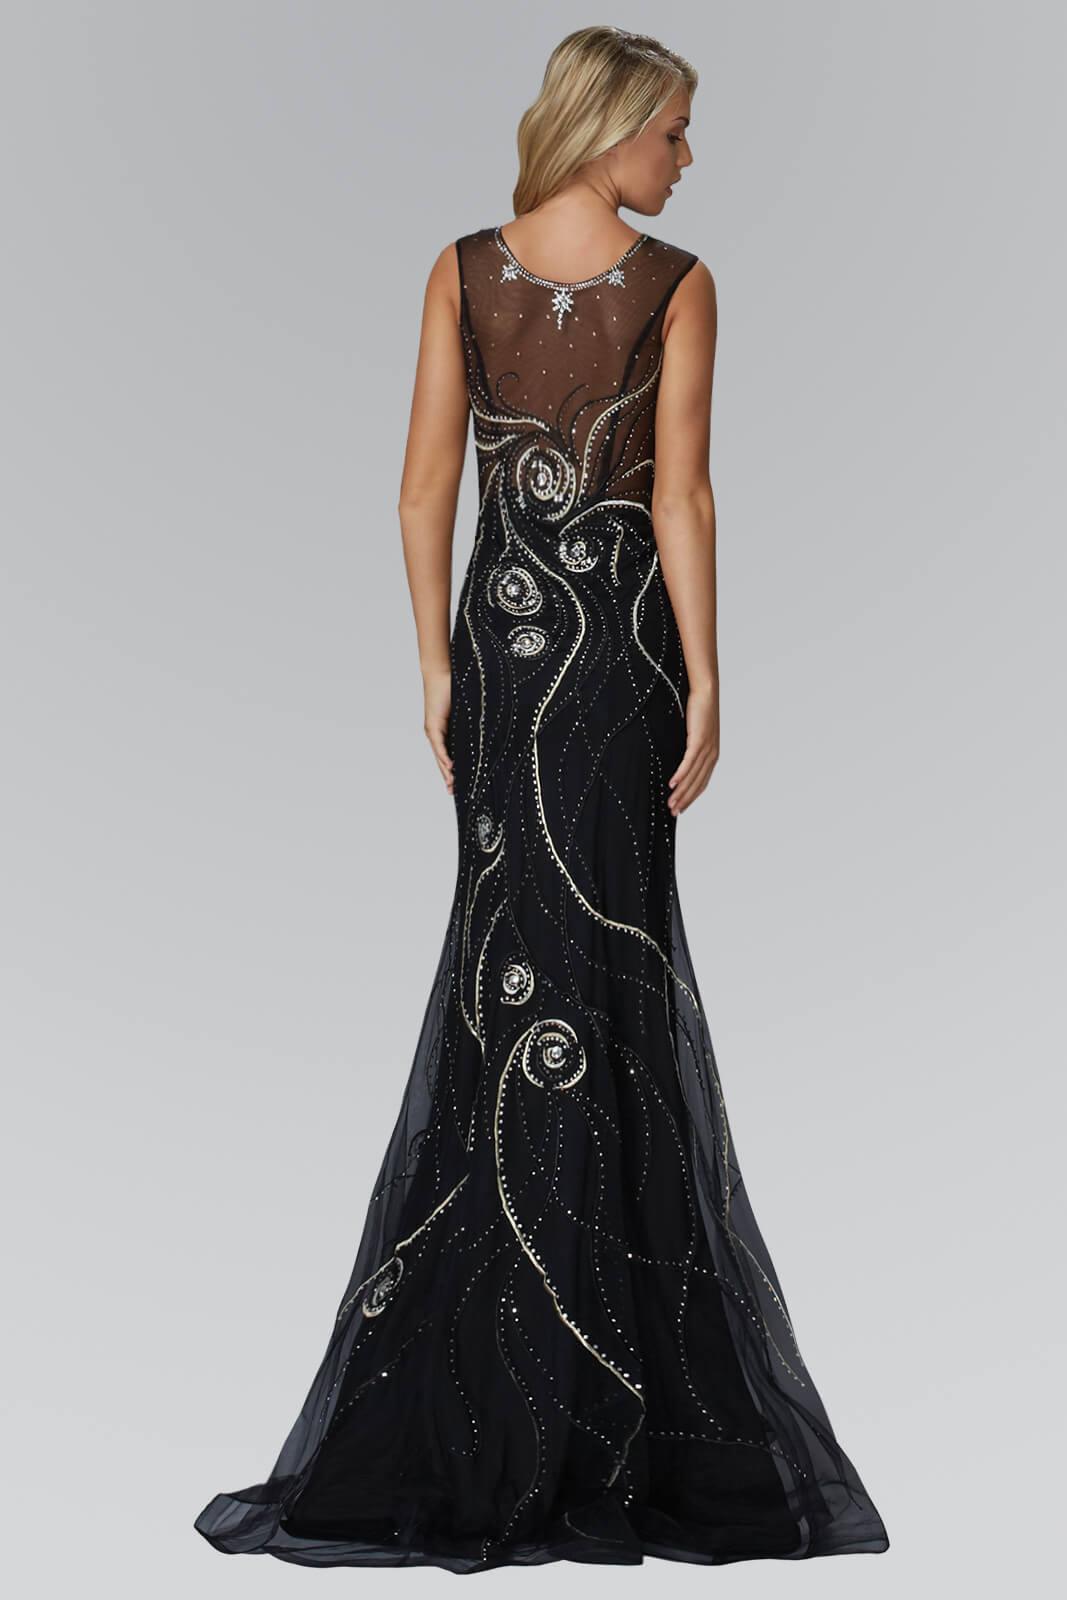 Prom Long Sequins Dress Mermaid Evening Gown Sale - The Dress Outlet